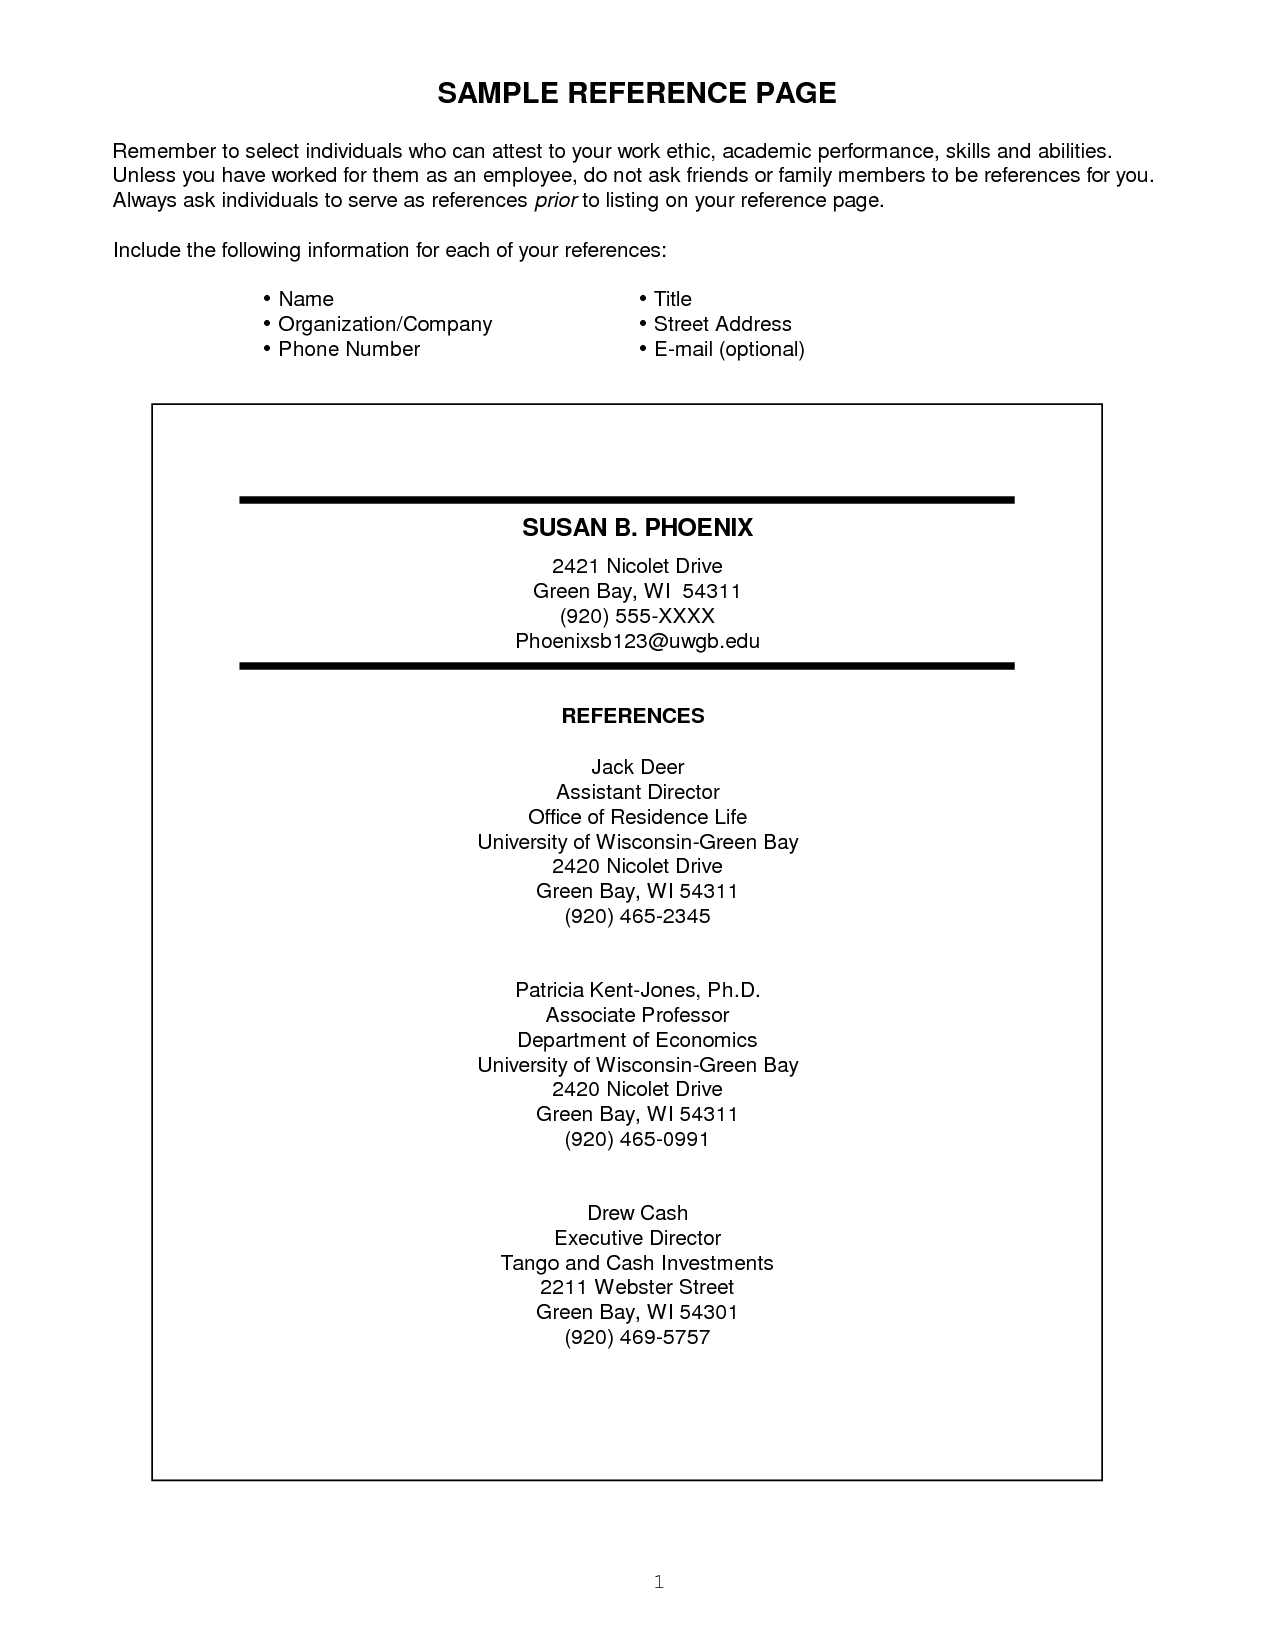 Free Reference Letter Template for Employment - Reference Examples On Resume Acurnamedia